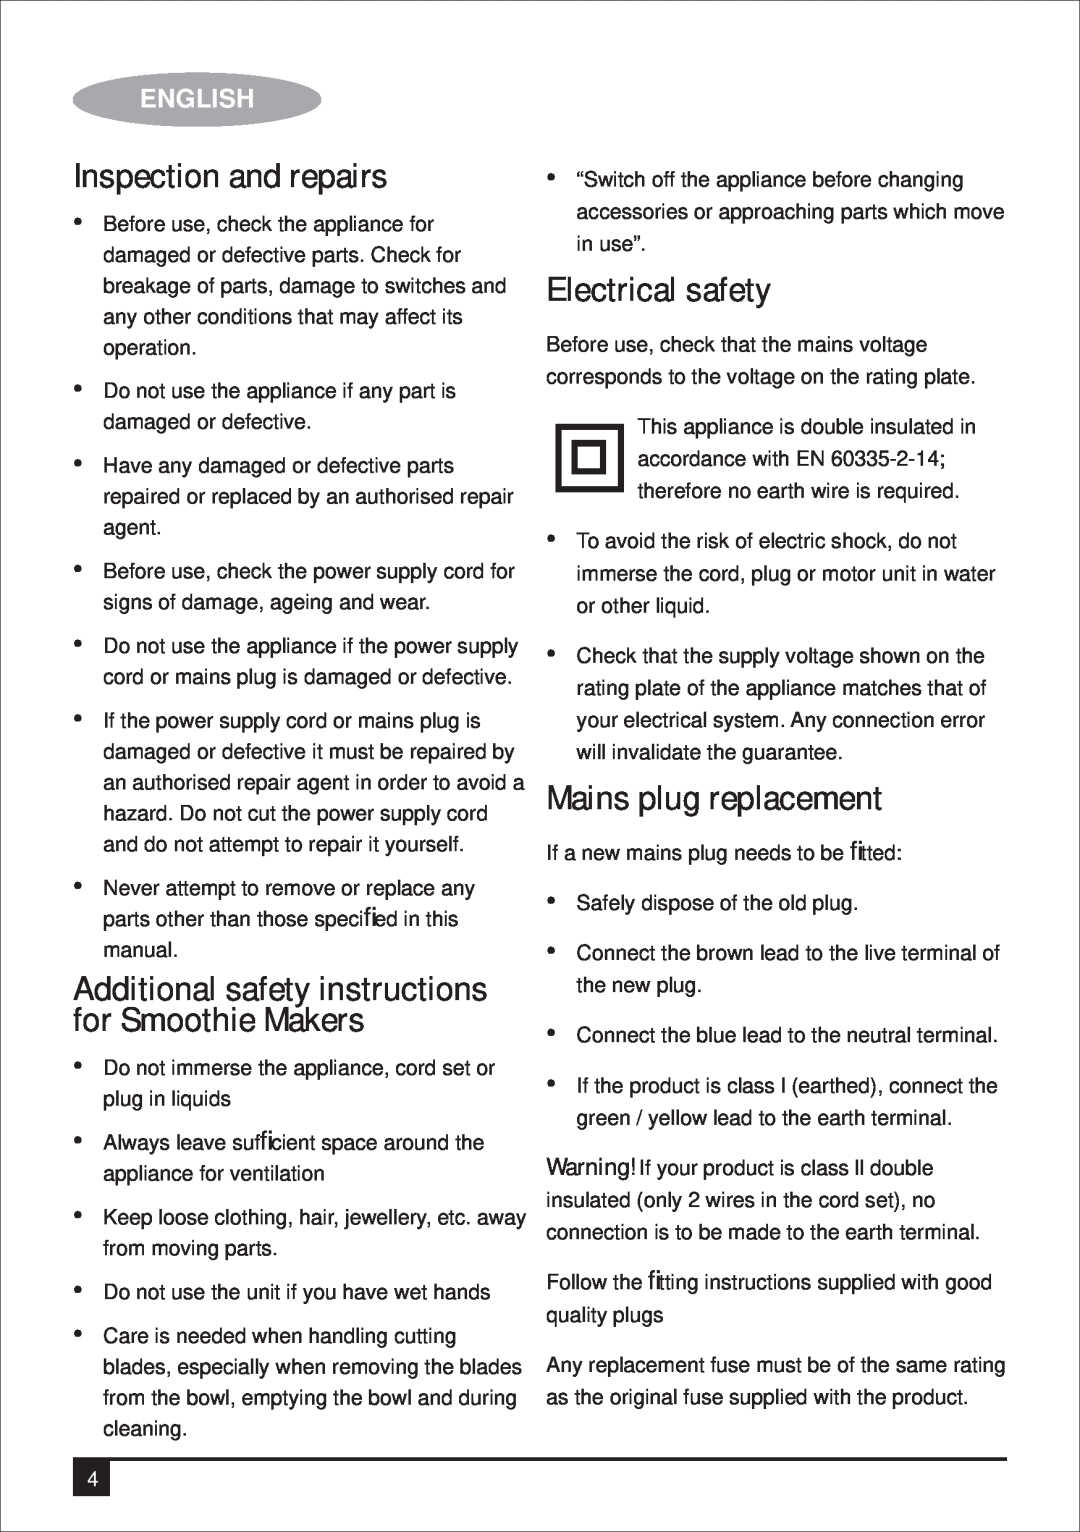 Black & Decker BS600 manual Inspection and repairs, Electrical safety, Mains plug replacement, English 